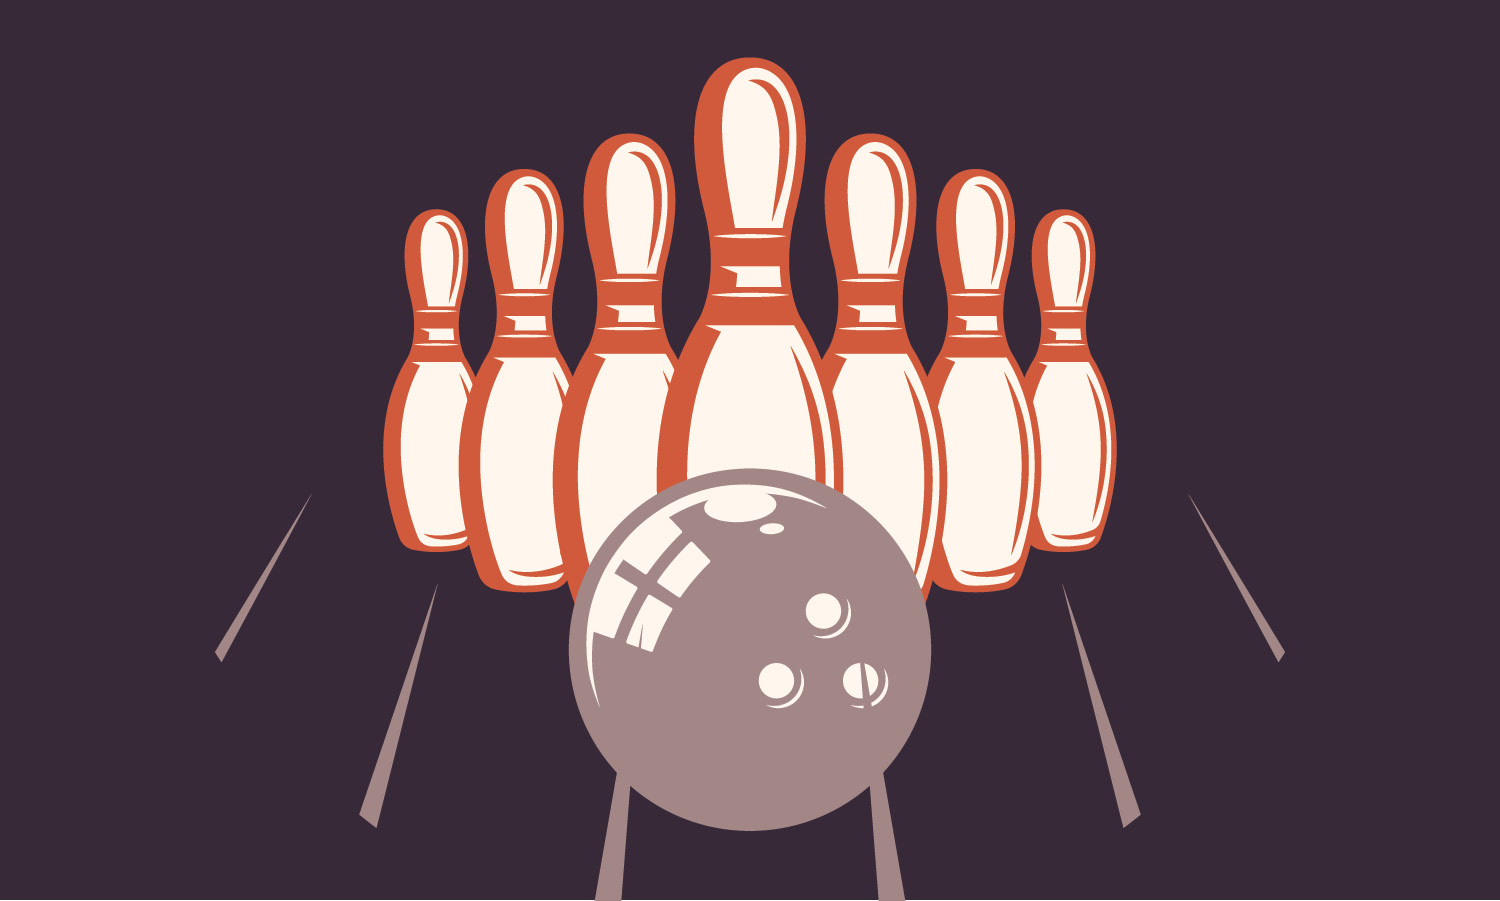 Illustration: Bowling ball in front of bowling pins.